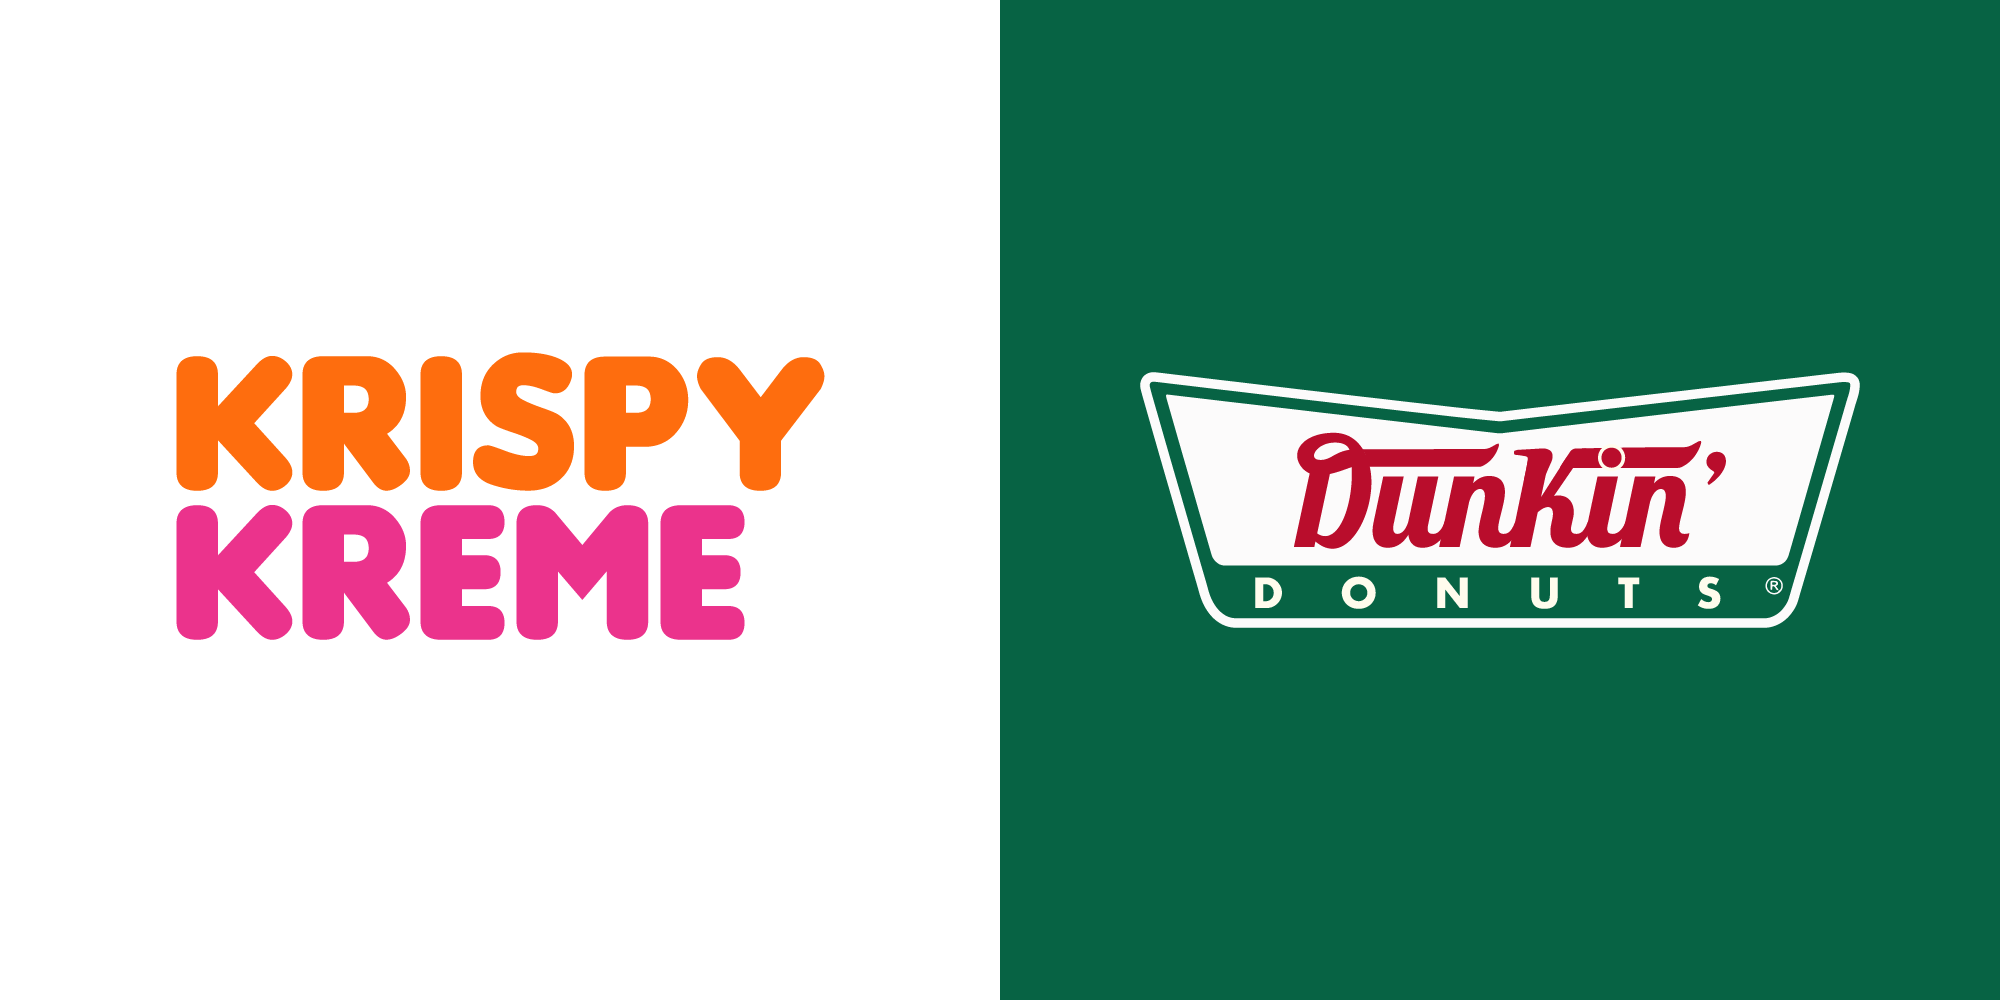 When Fast Food Logos Get Mashed Up - iDevie